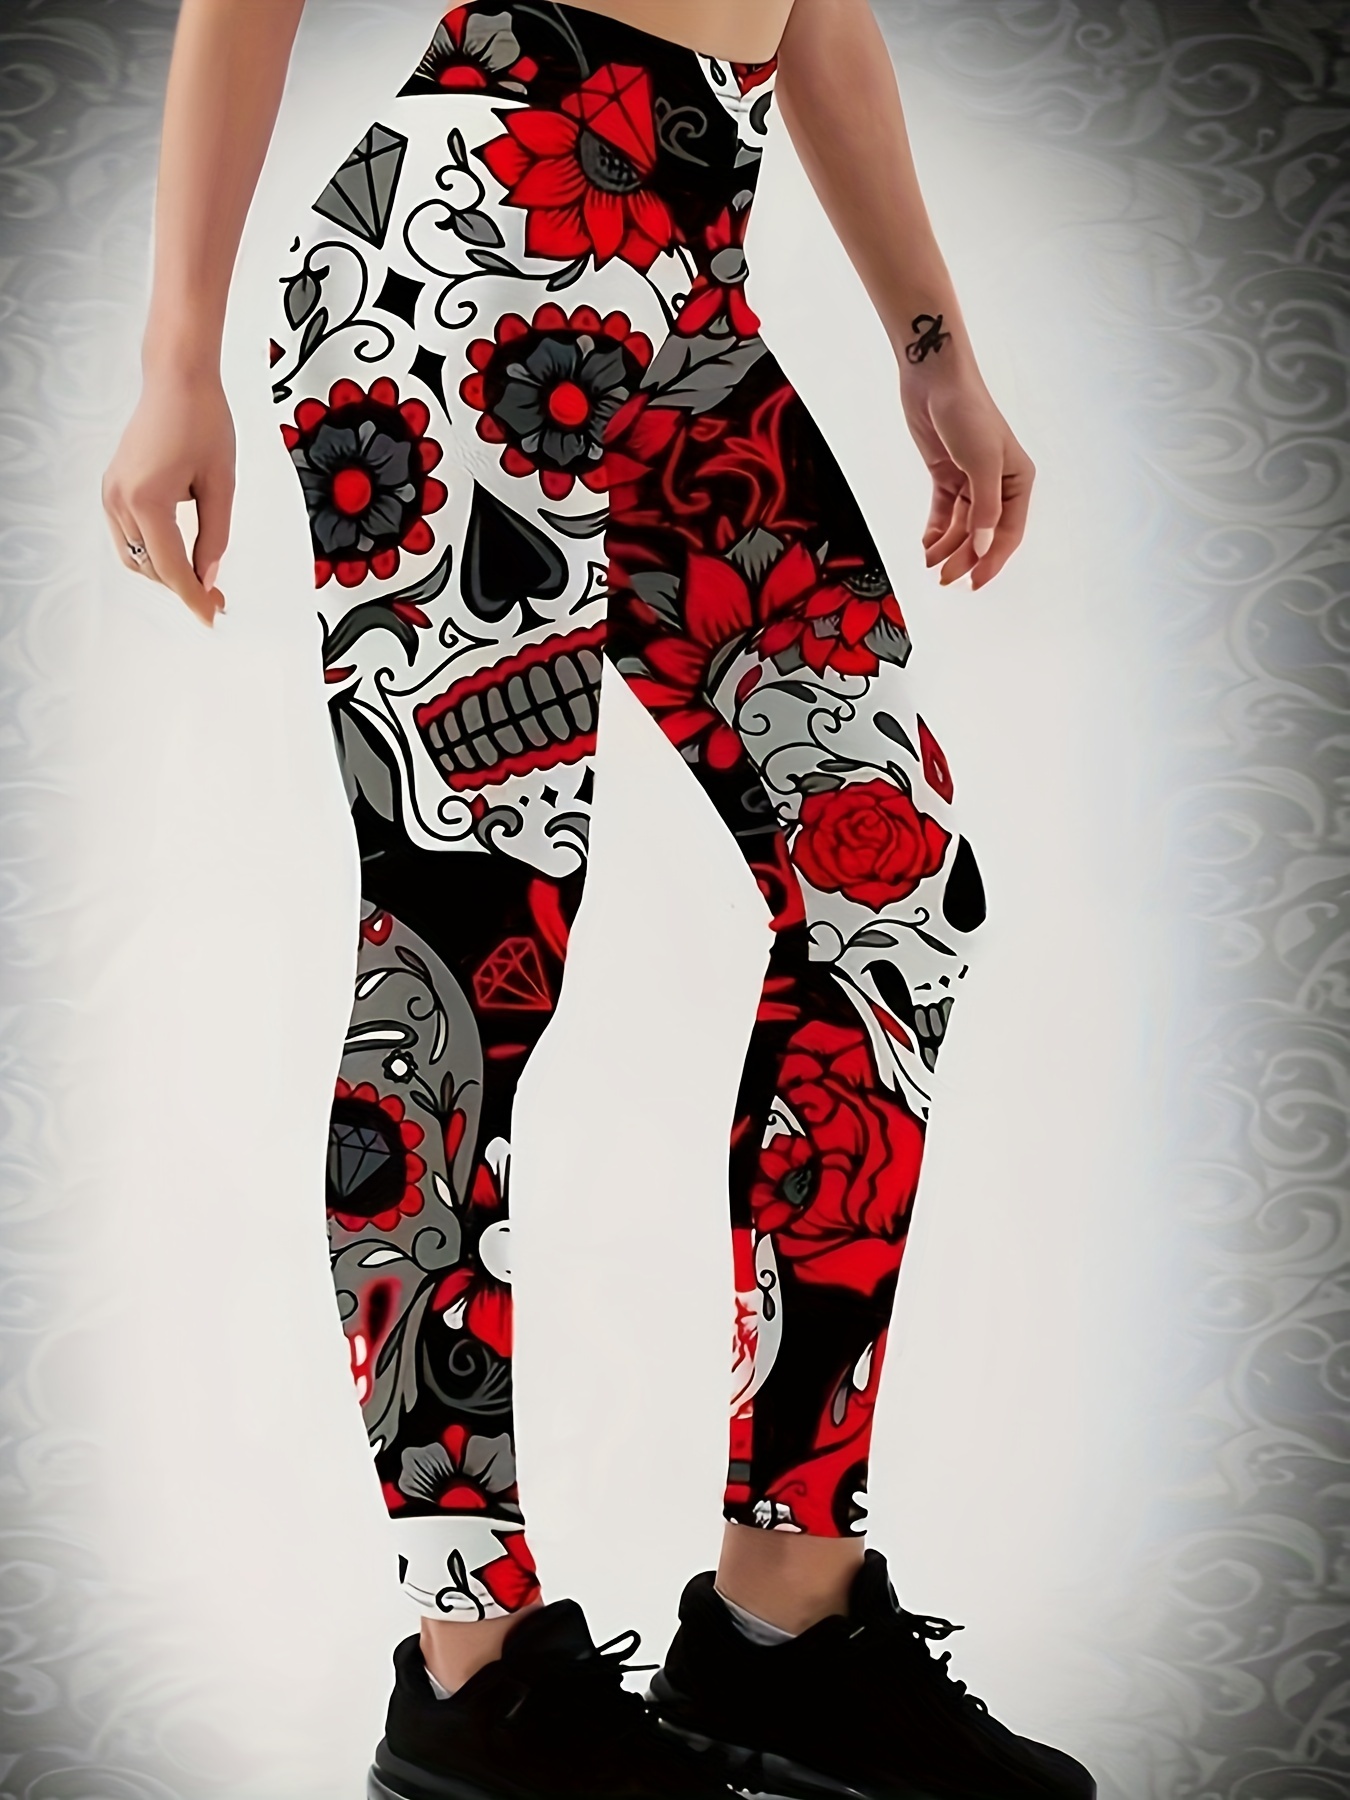 Floral Skull Print Skinny Leggings Casual Every Day Stretchy